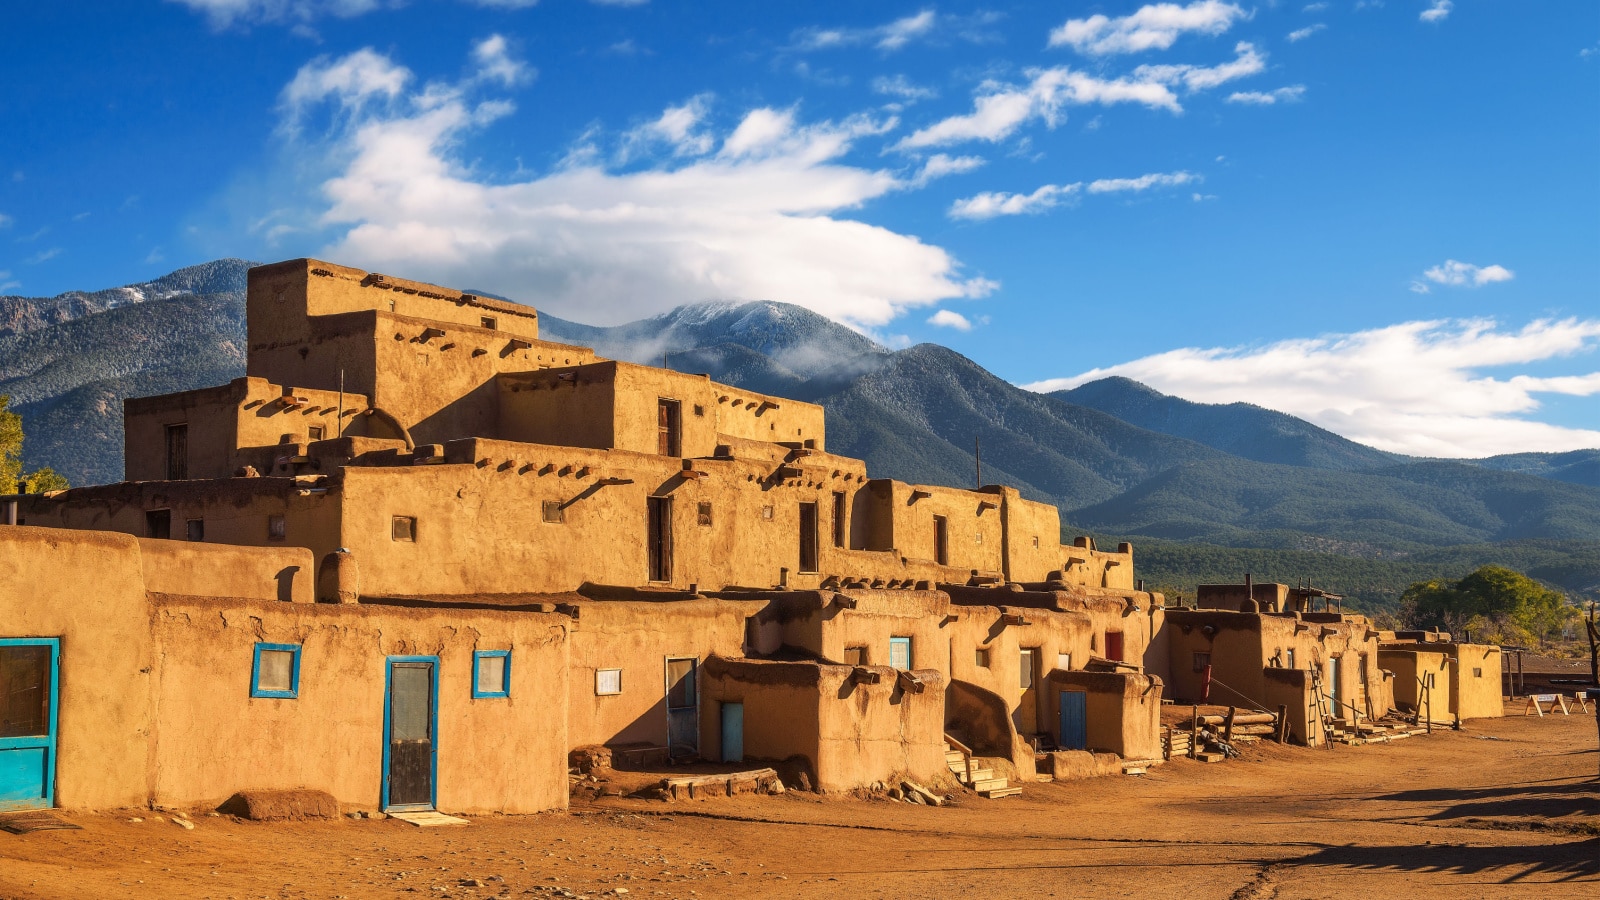 Ancient dwellings of UNESCO World Heritage Site named Taos Pueblo in New Mexico. Taos Pueblo is believed to be one of the oldest continuously inhabited settlements in USA.